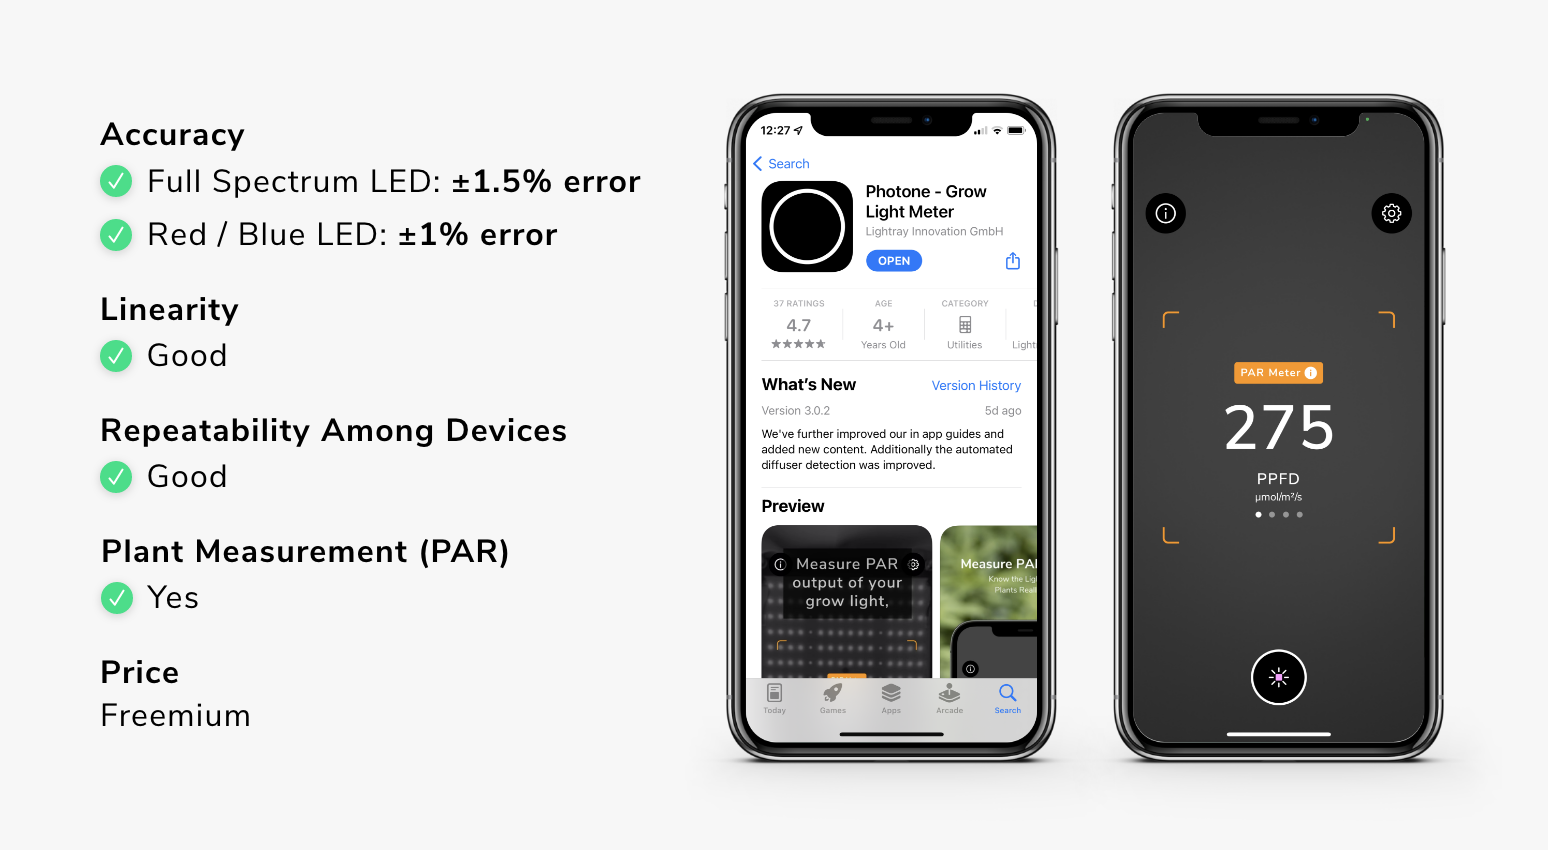 Photone is the best plant light meter app on iOS and Android. It's the only app that is accurate, linear, repeatable among different devices, and offers PAR measurement with its PPFD meter.